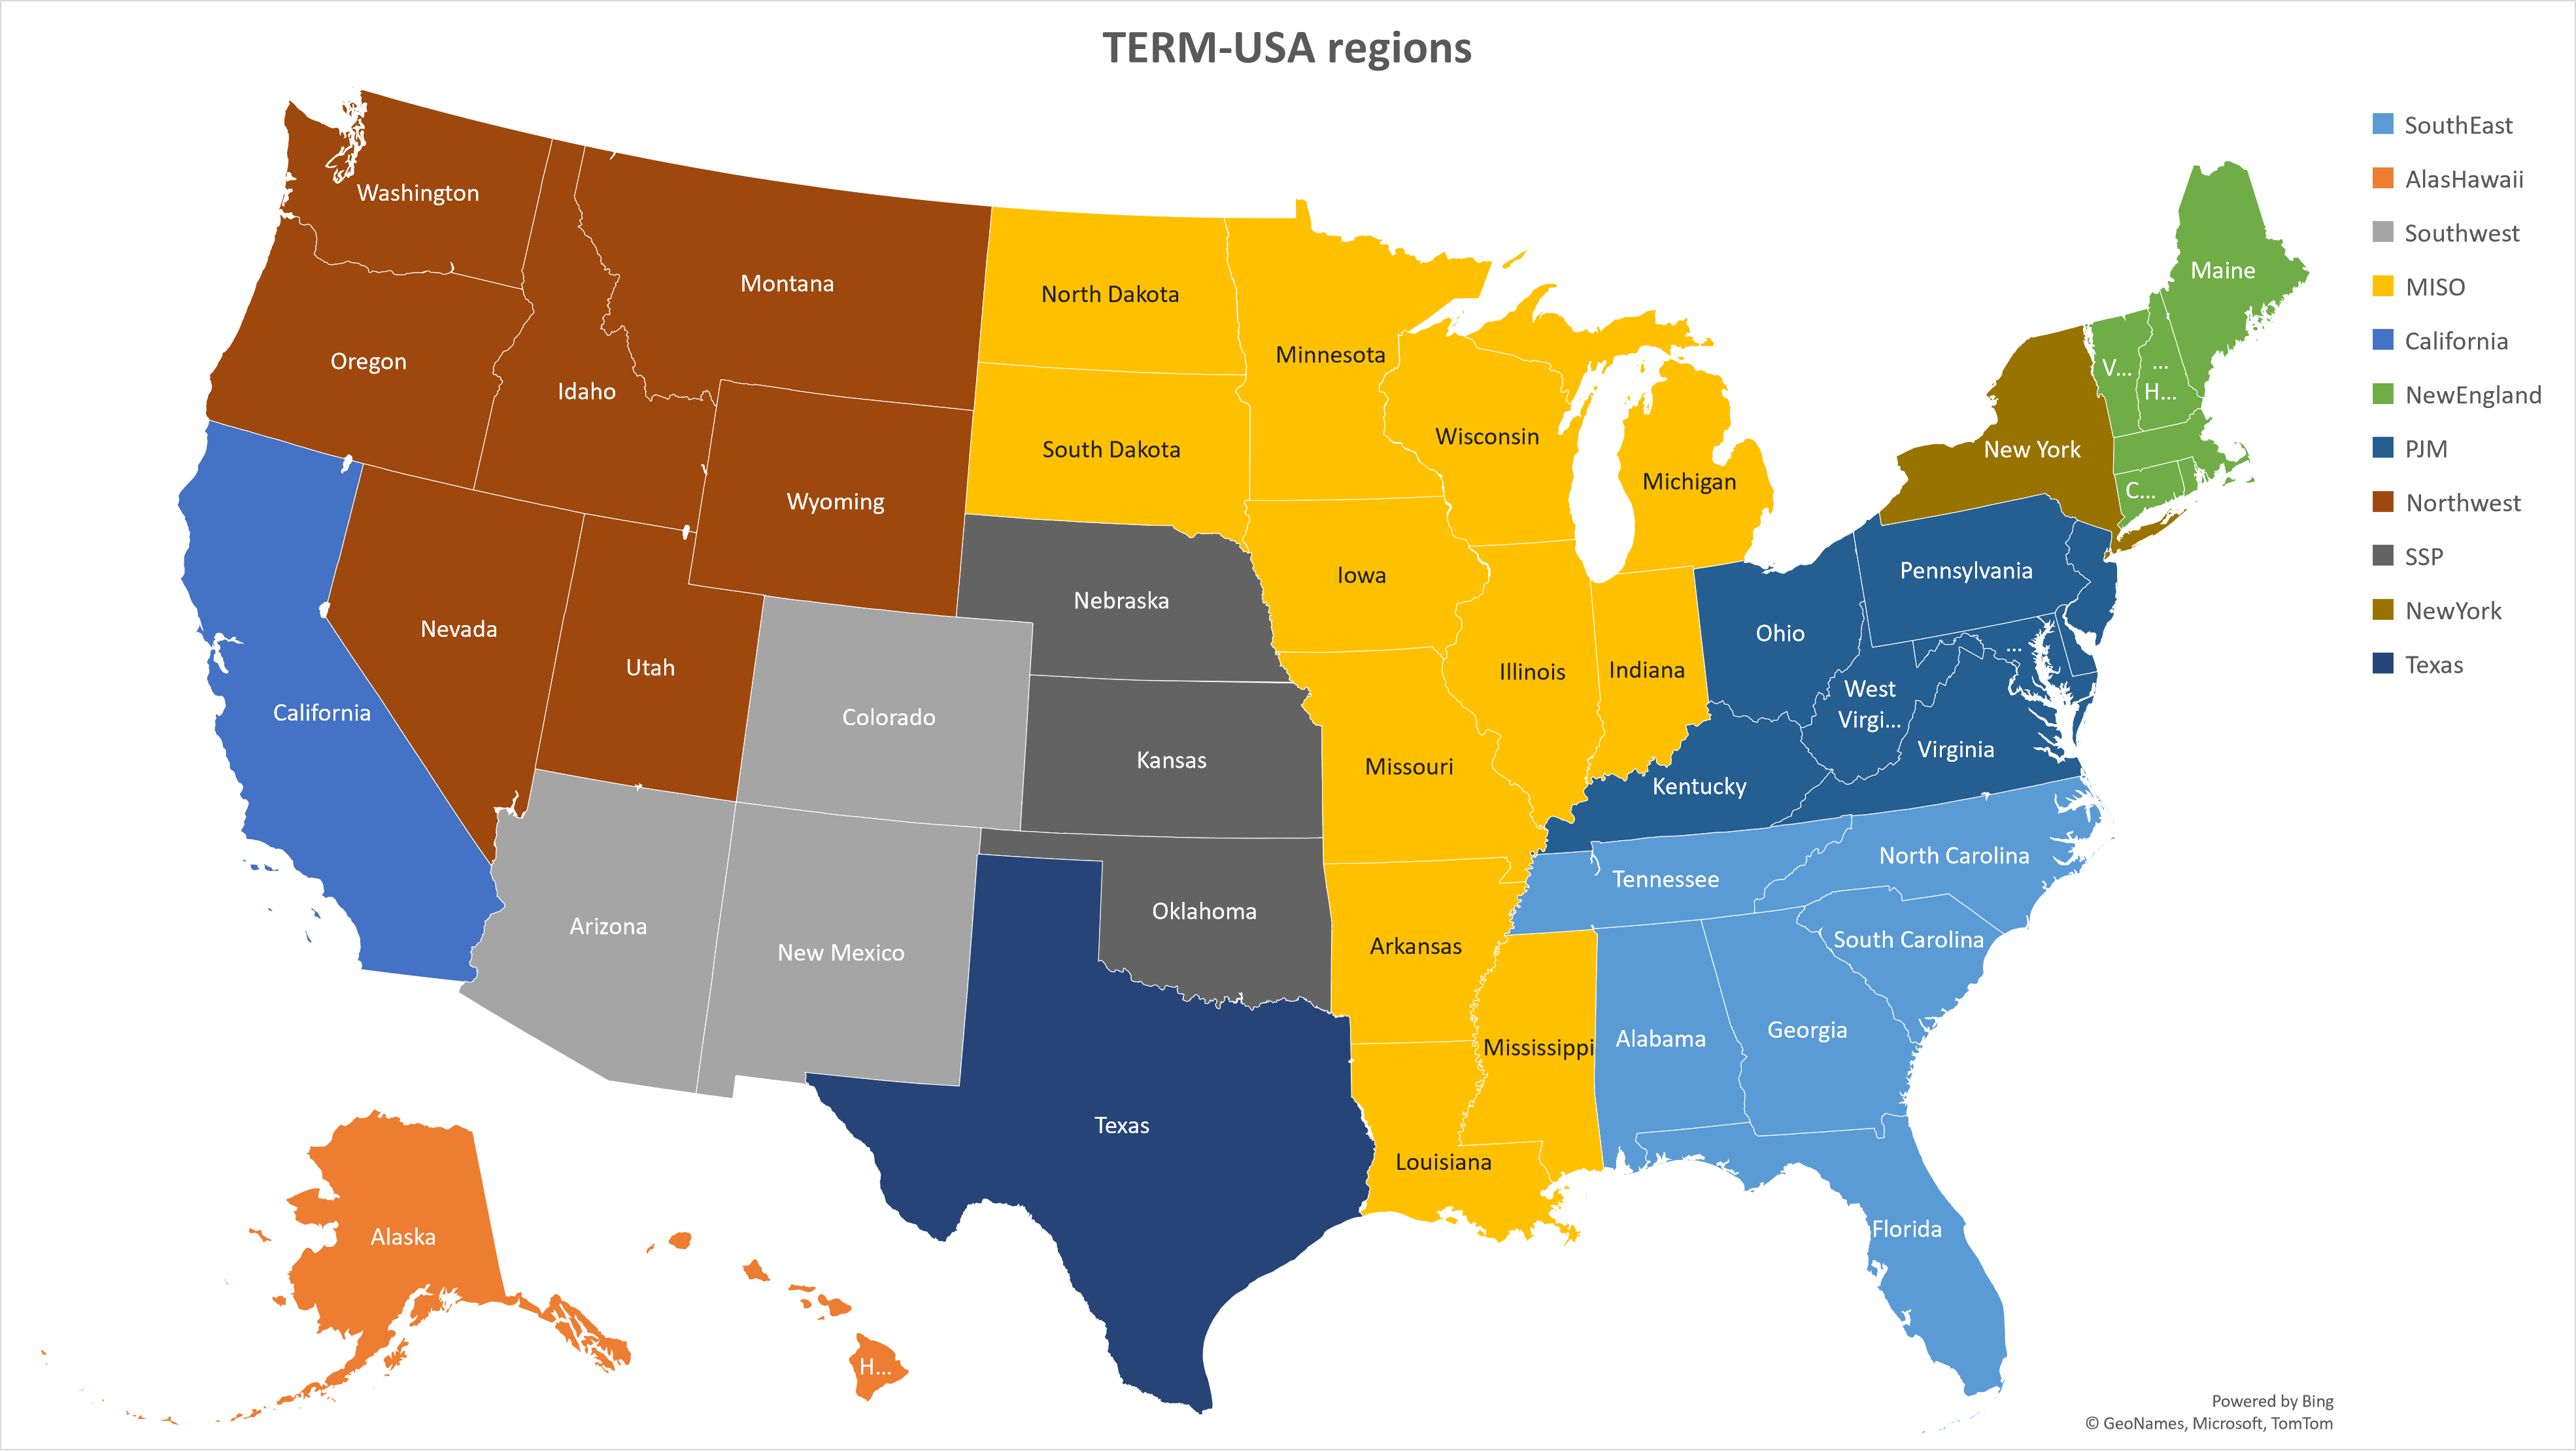 Regions used in the TERM-USA course